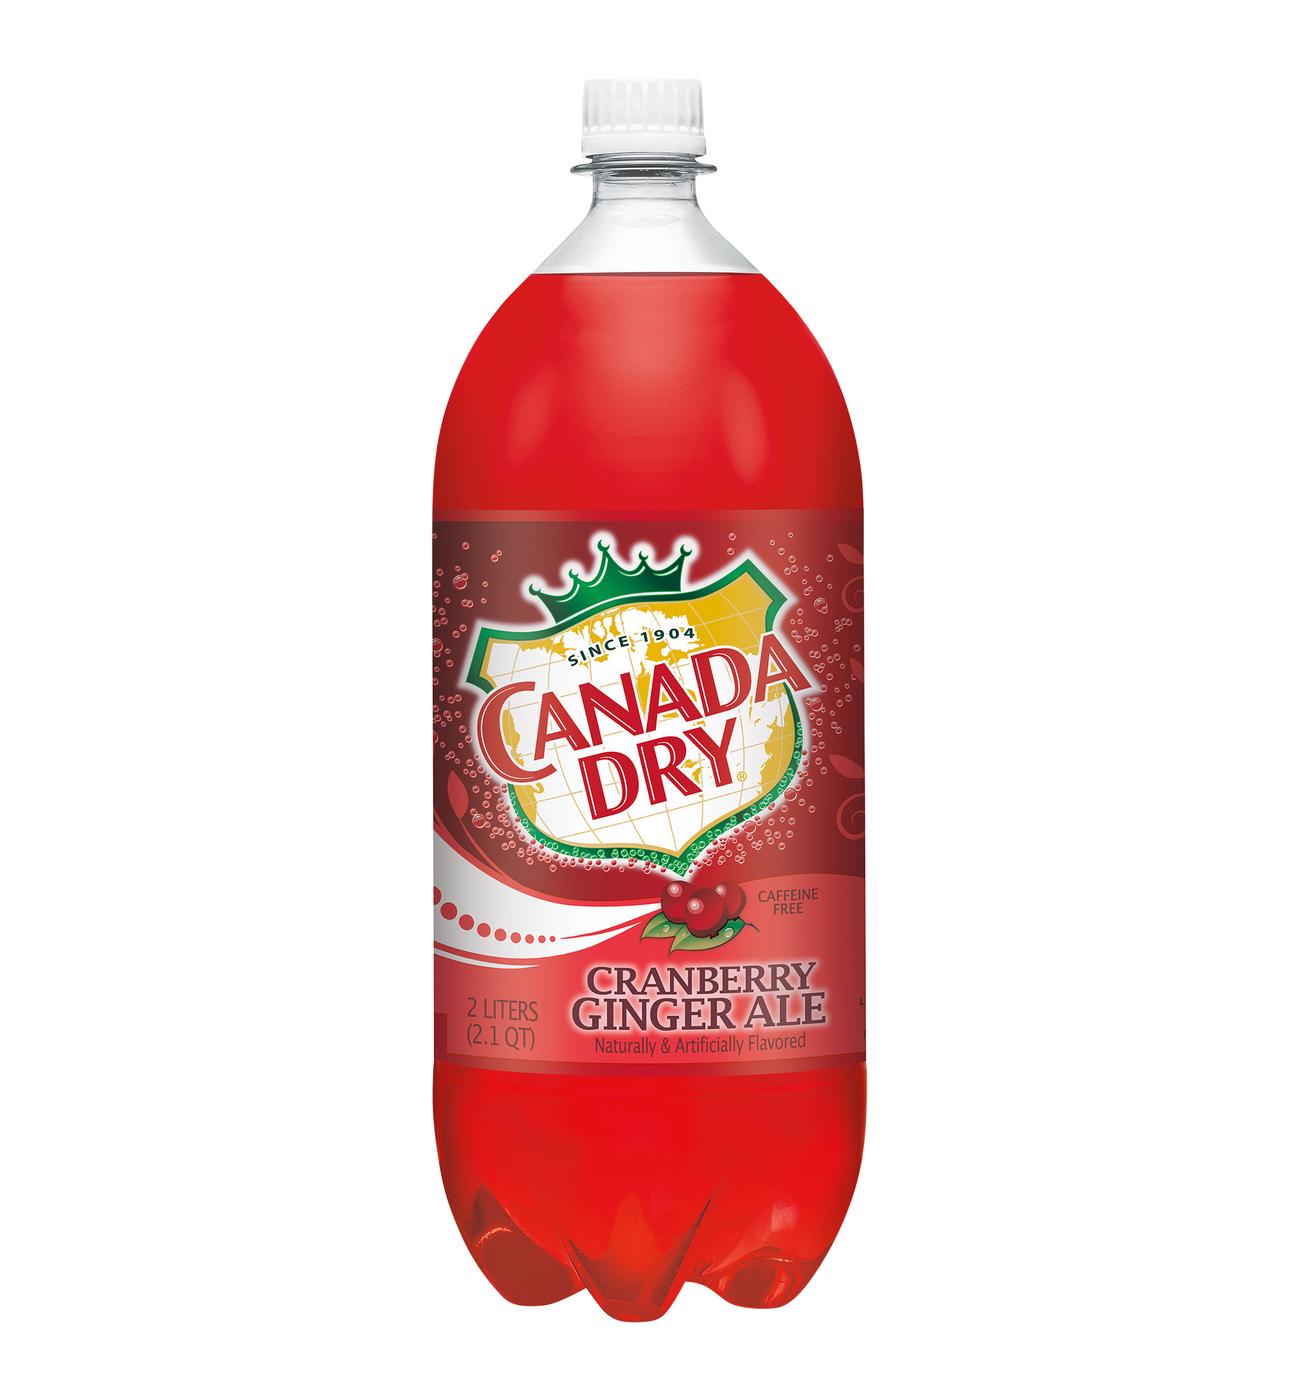 Canada Dry Cranberry Ginger Ale; image 1 of 2